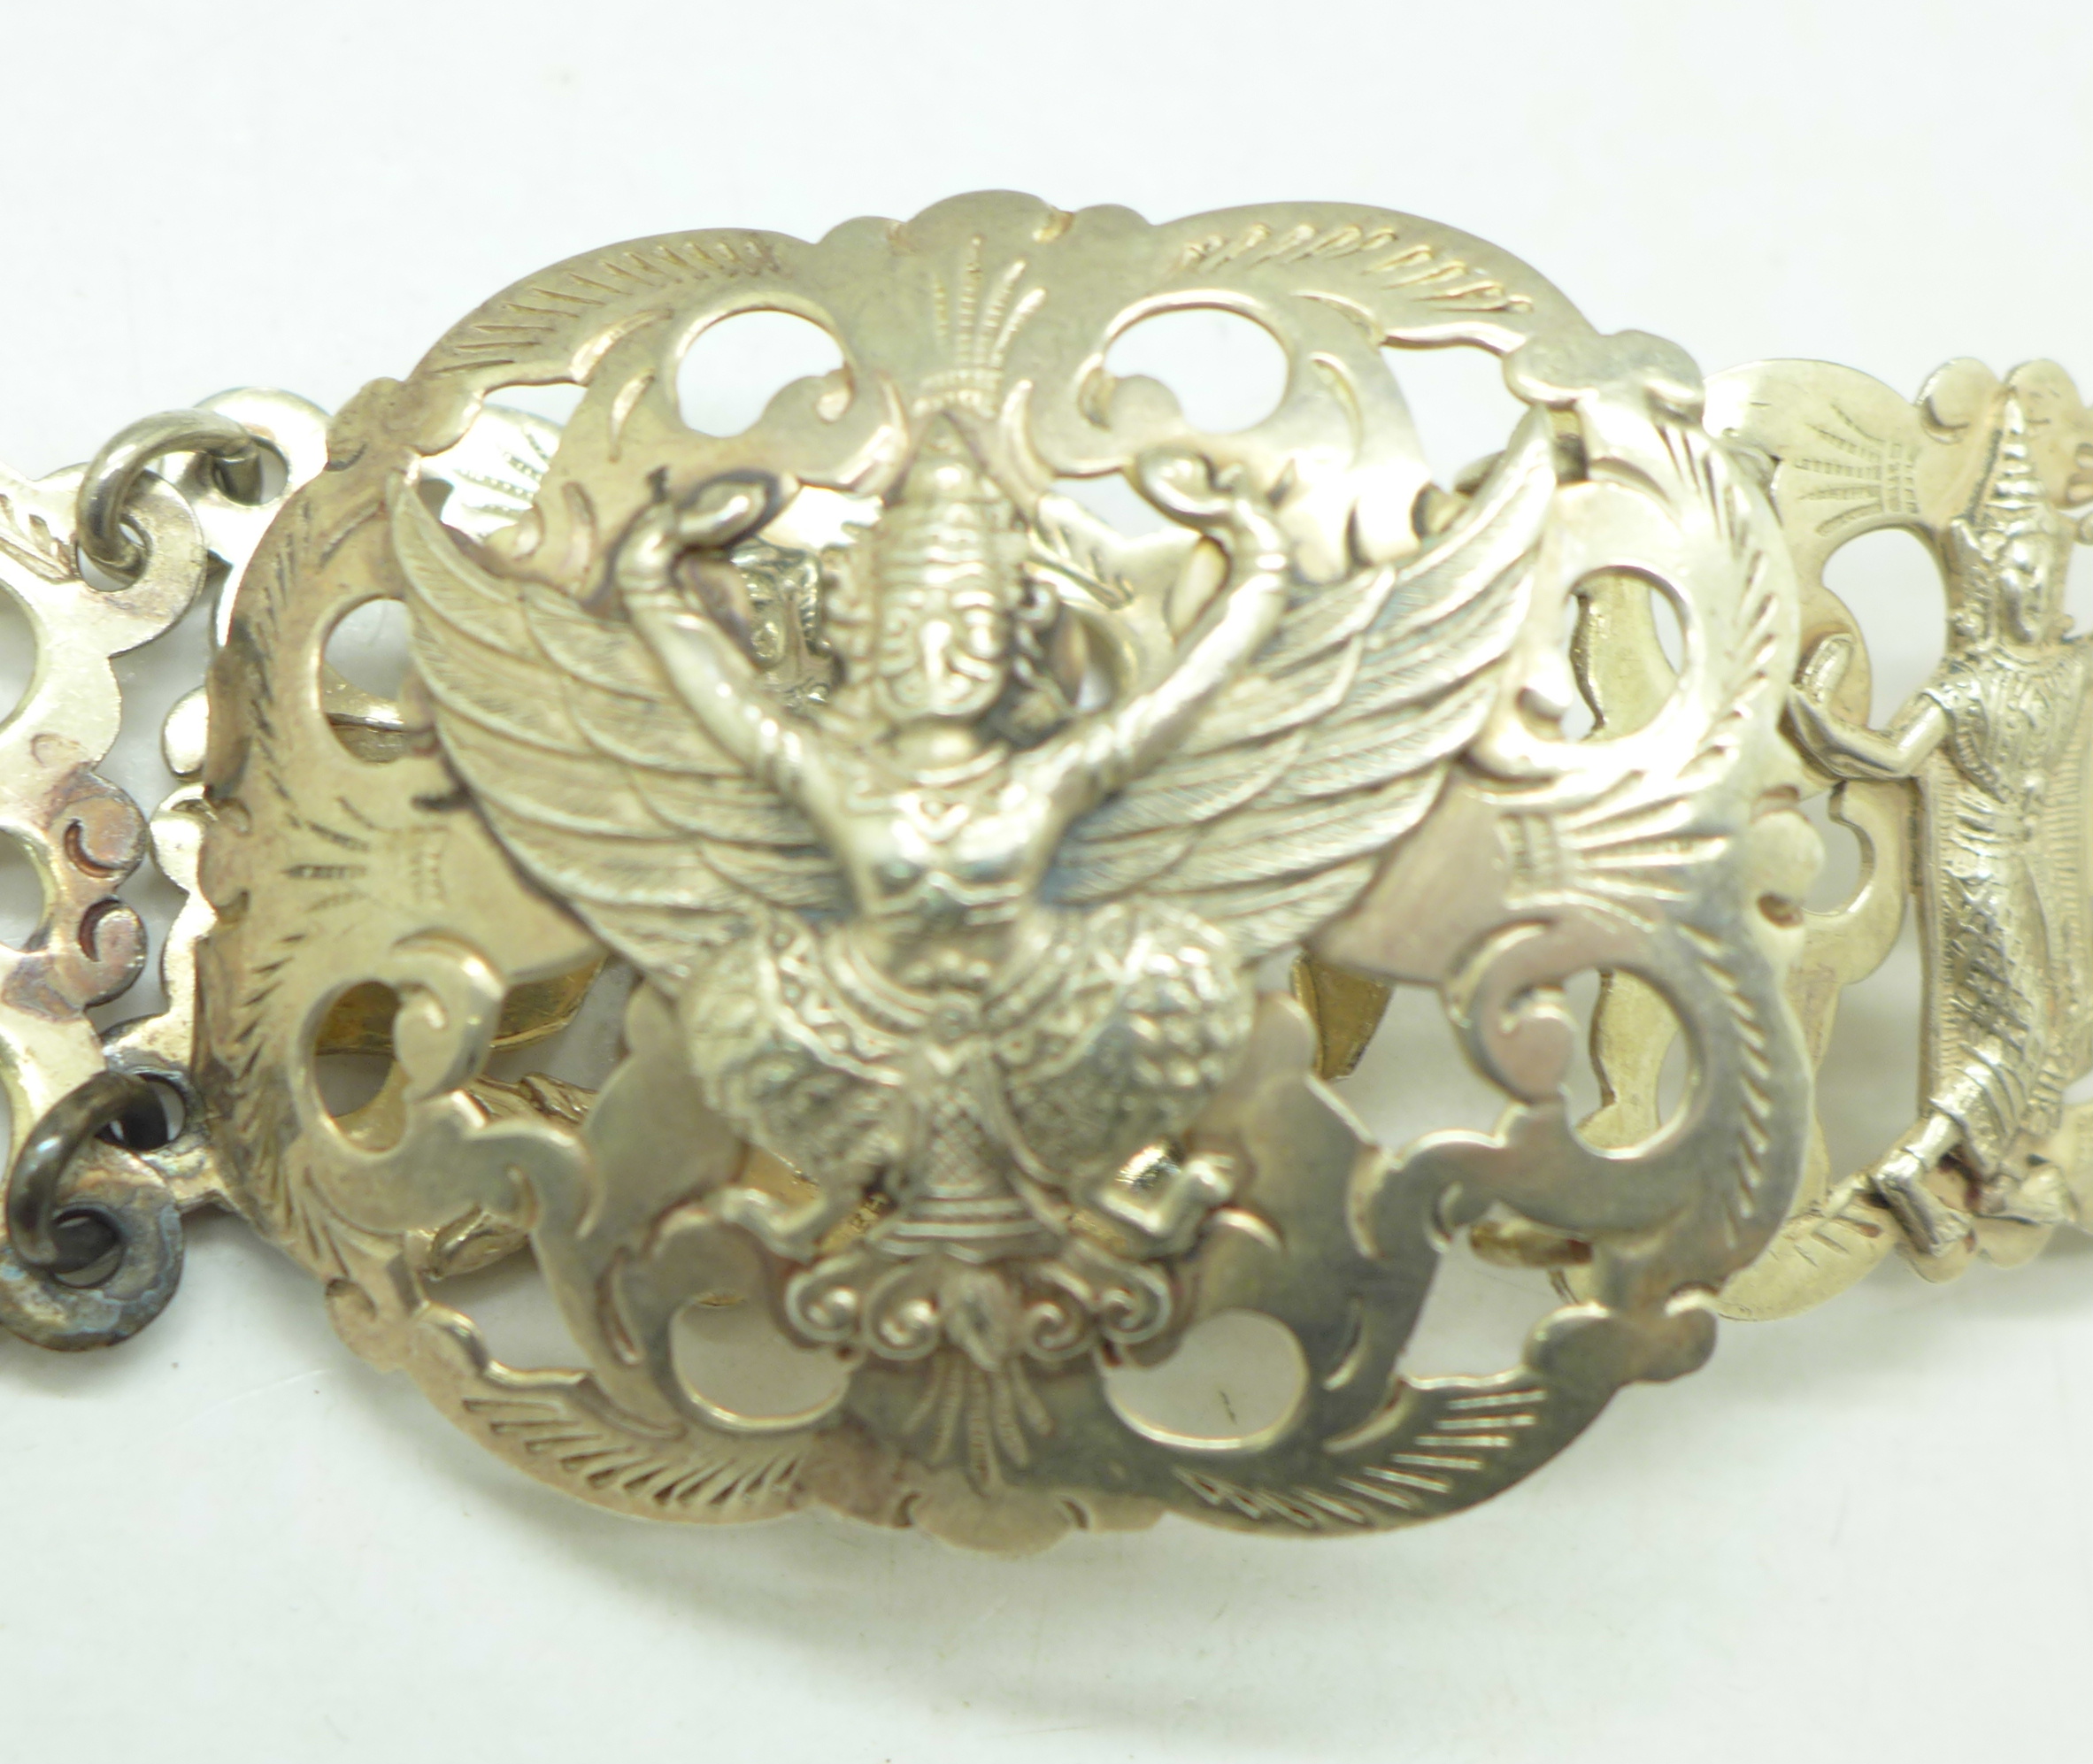 A Siam sterling silver belt, 193g, (fastening clip requires repair) - Image 4 of 8